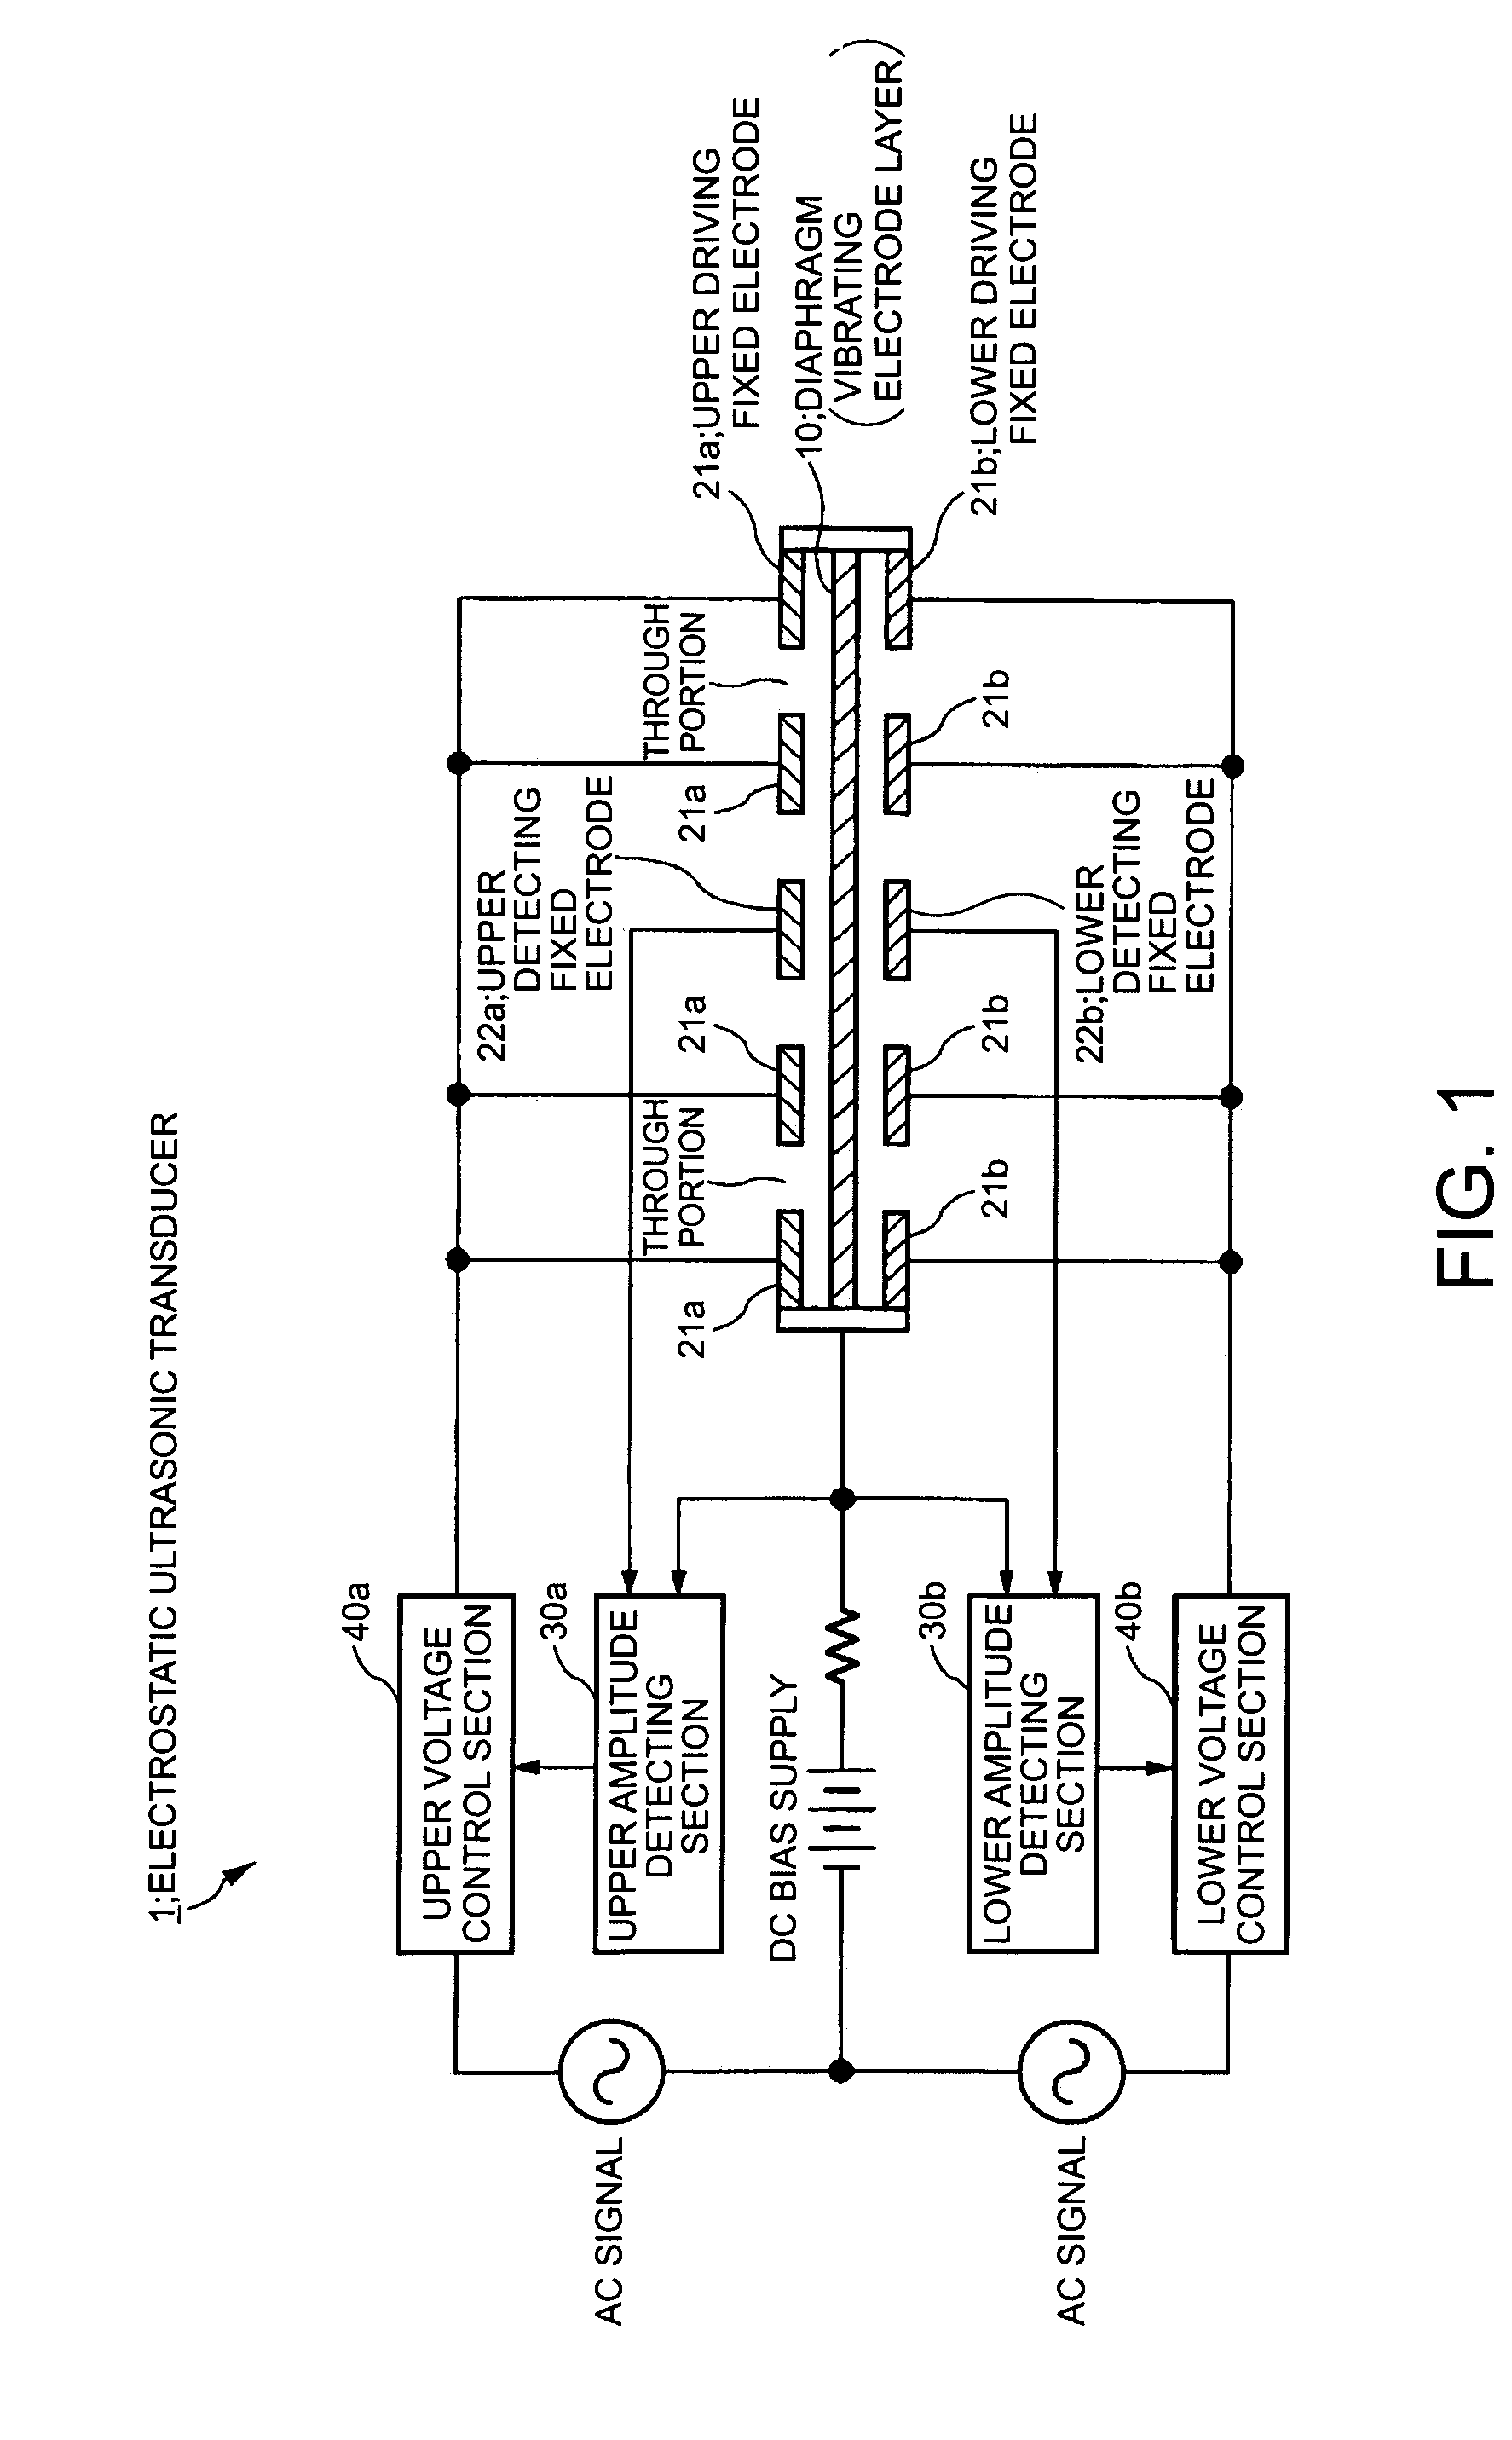 Ultrasonic transducer, ultrasonic speaker, and method of controlling the driving of ultrasonic transducer